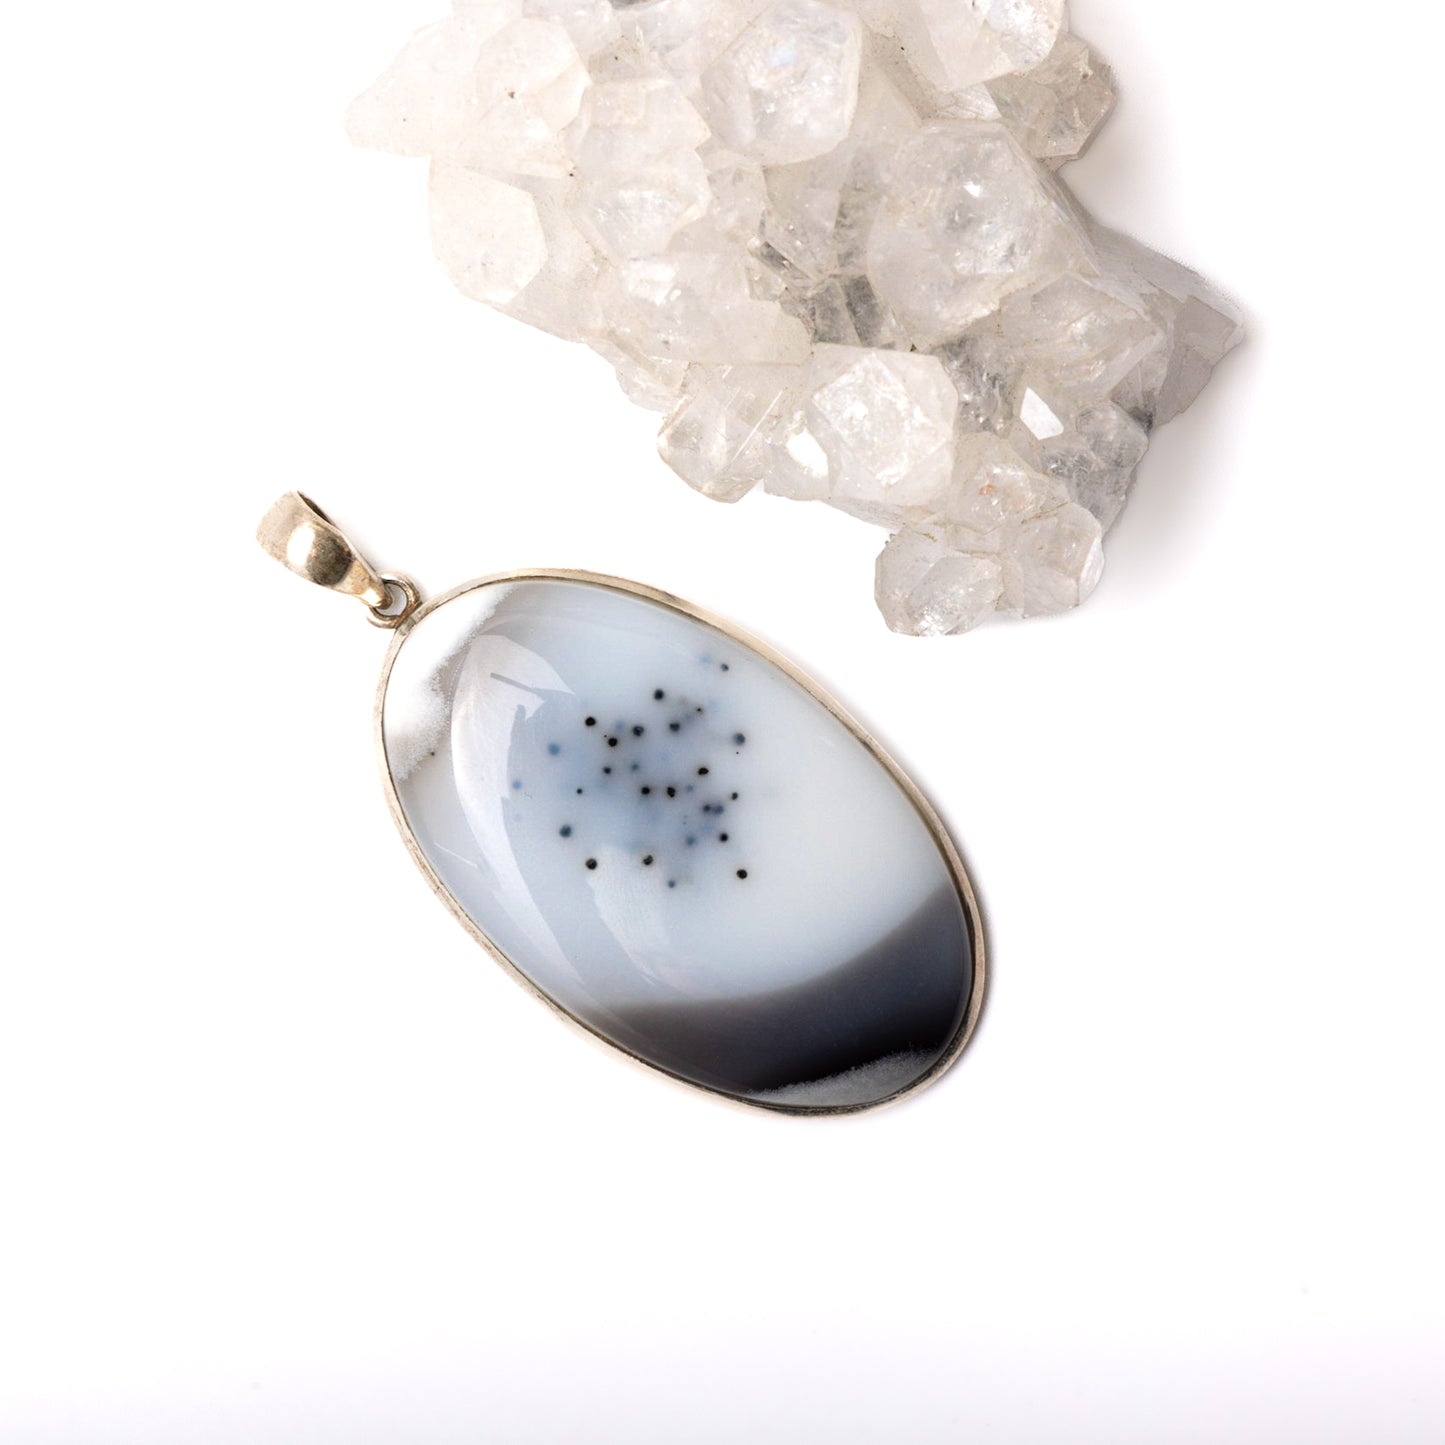 Dendritic Opal Pendant - Experience the magic of life with our Dendritic Opal pendant. Stone roughly measures 2.25". Each pendant is uniquely chosen for you.